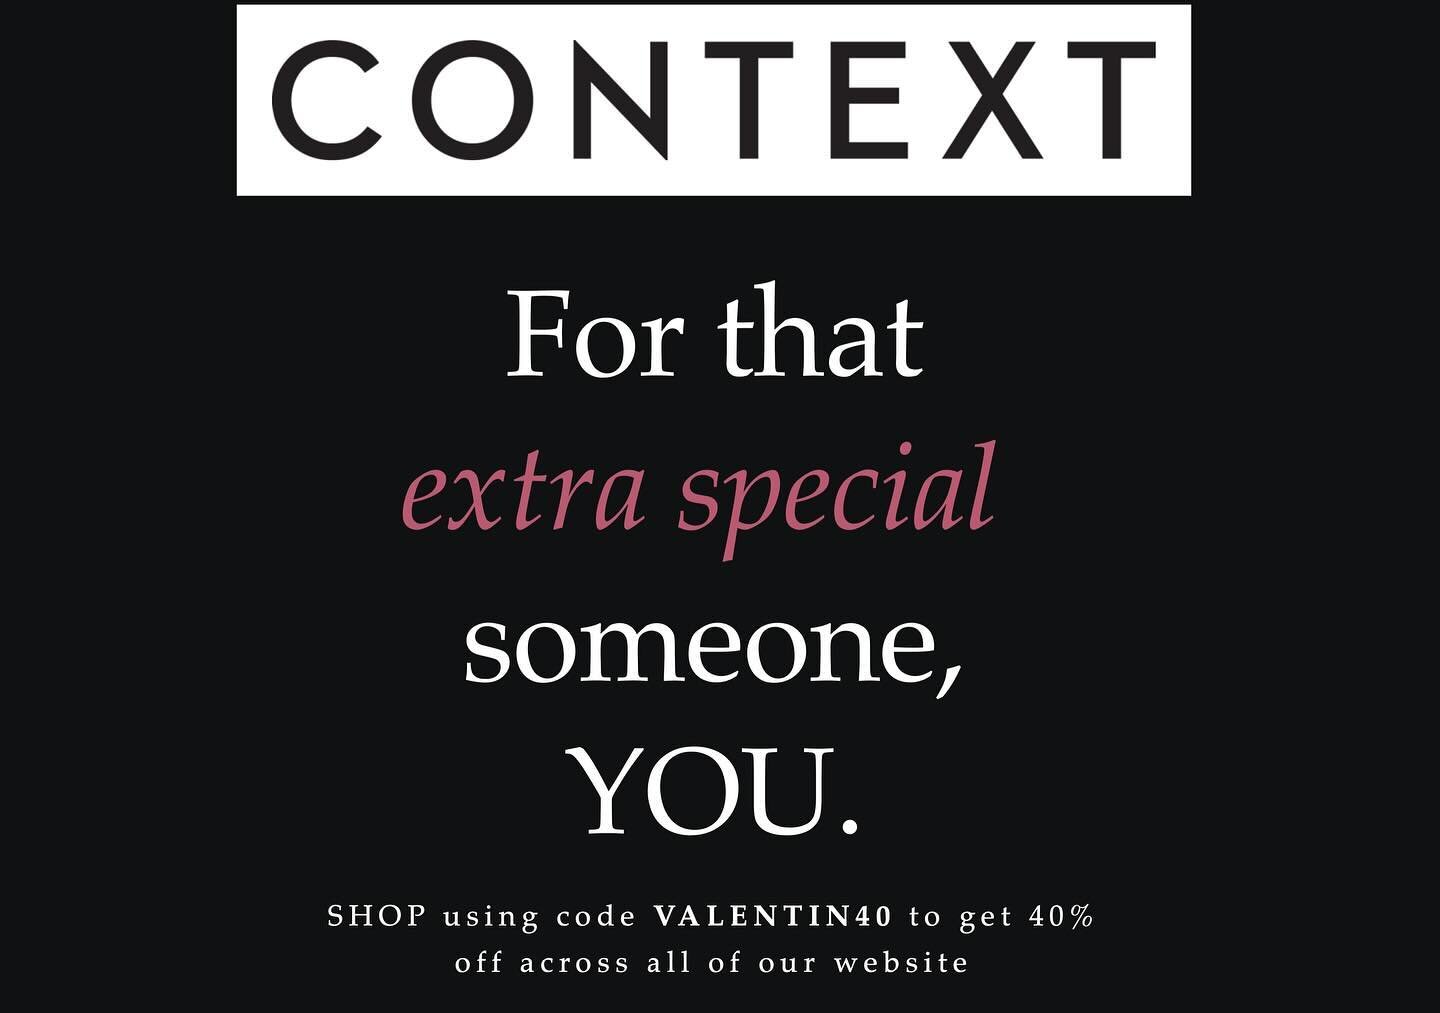 For that extra special someone, YOU! Code only valid until 2/14 midnight.  #beauty #beautyhacks #contextskin #ipsy #valentinesday #valentinesdaygift #you #skincare